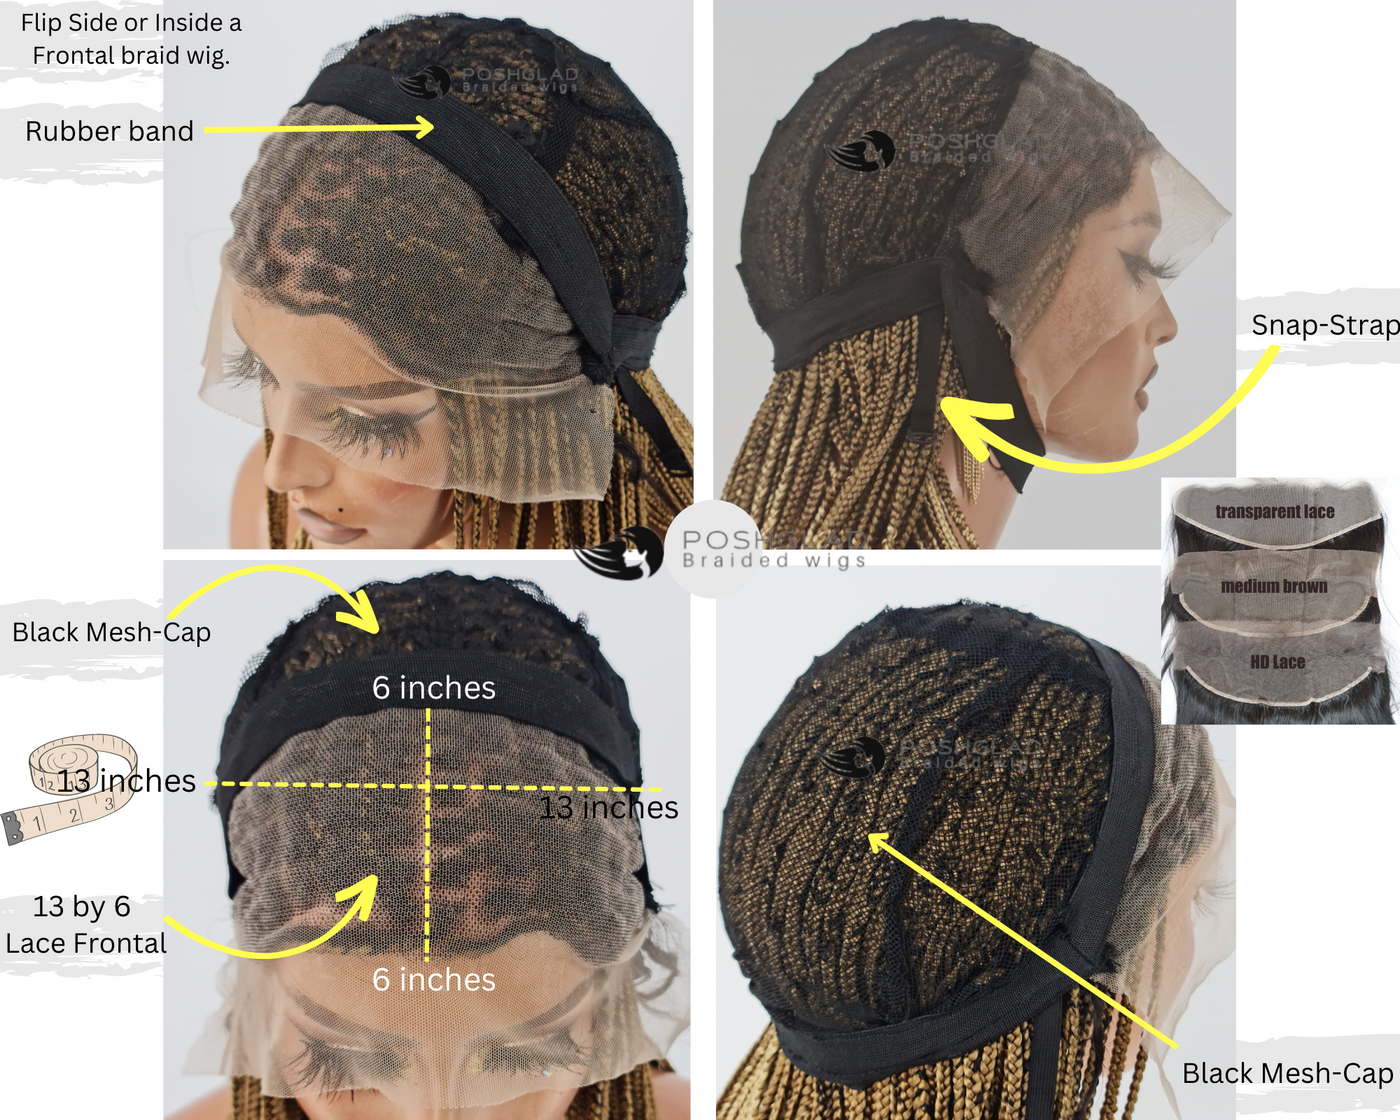 13 by 6 Lace Frontal Poshglad Braided Wigs